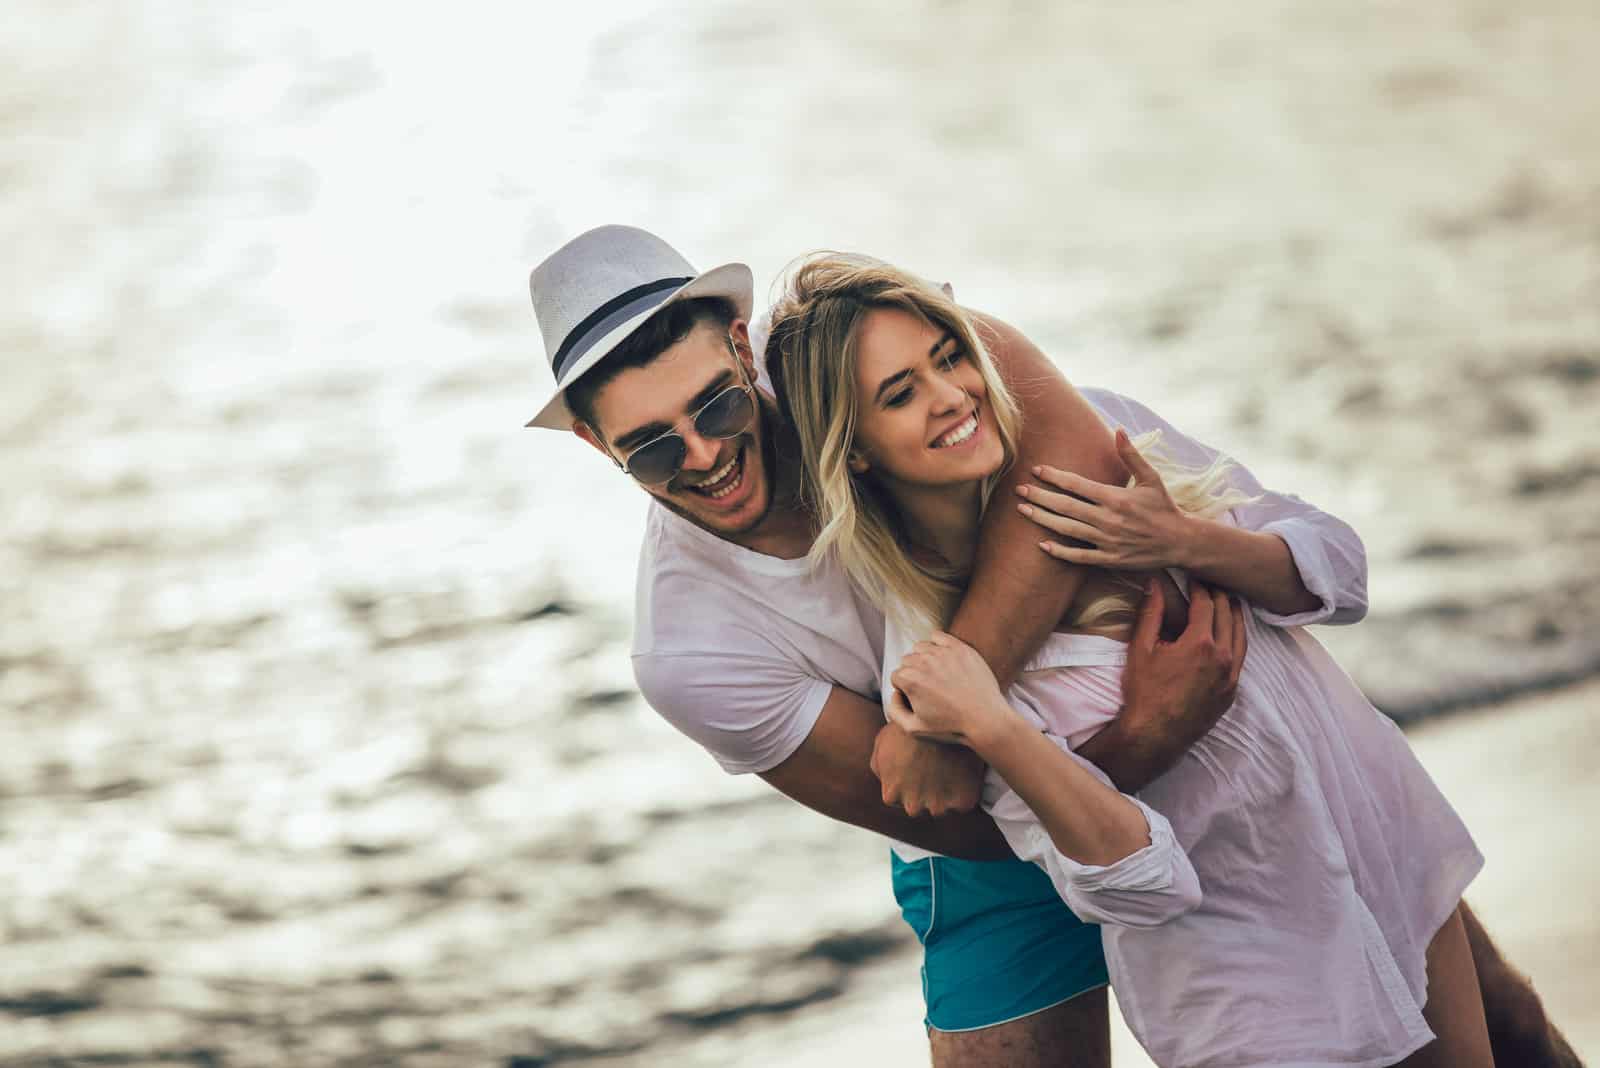 a smiling man with a hat on his head hugs a woman on the beach and laughs